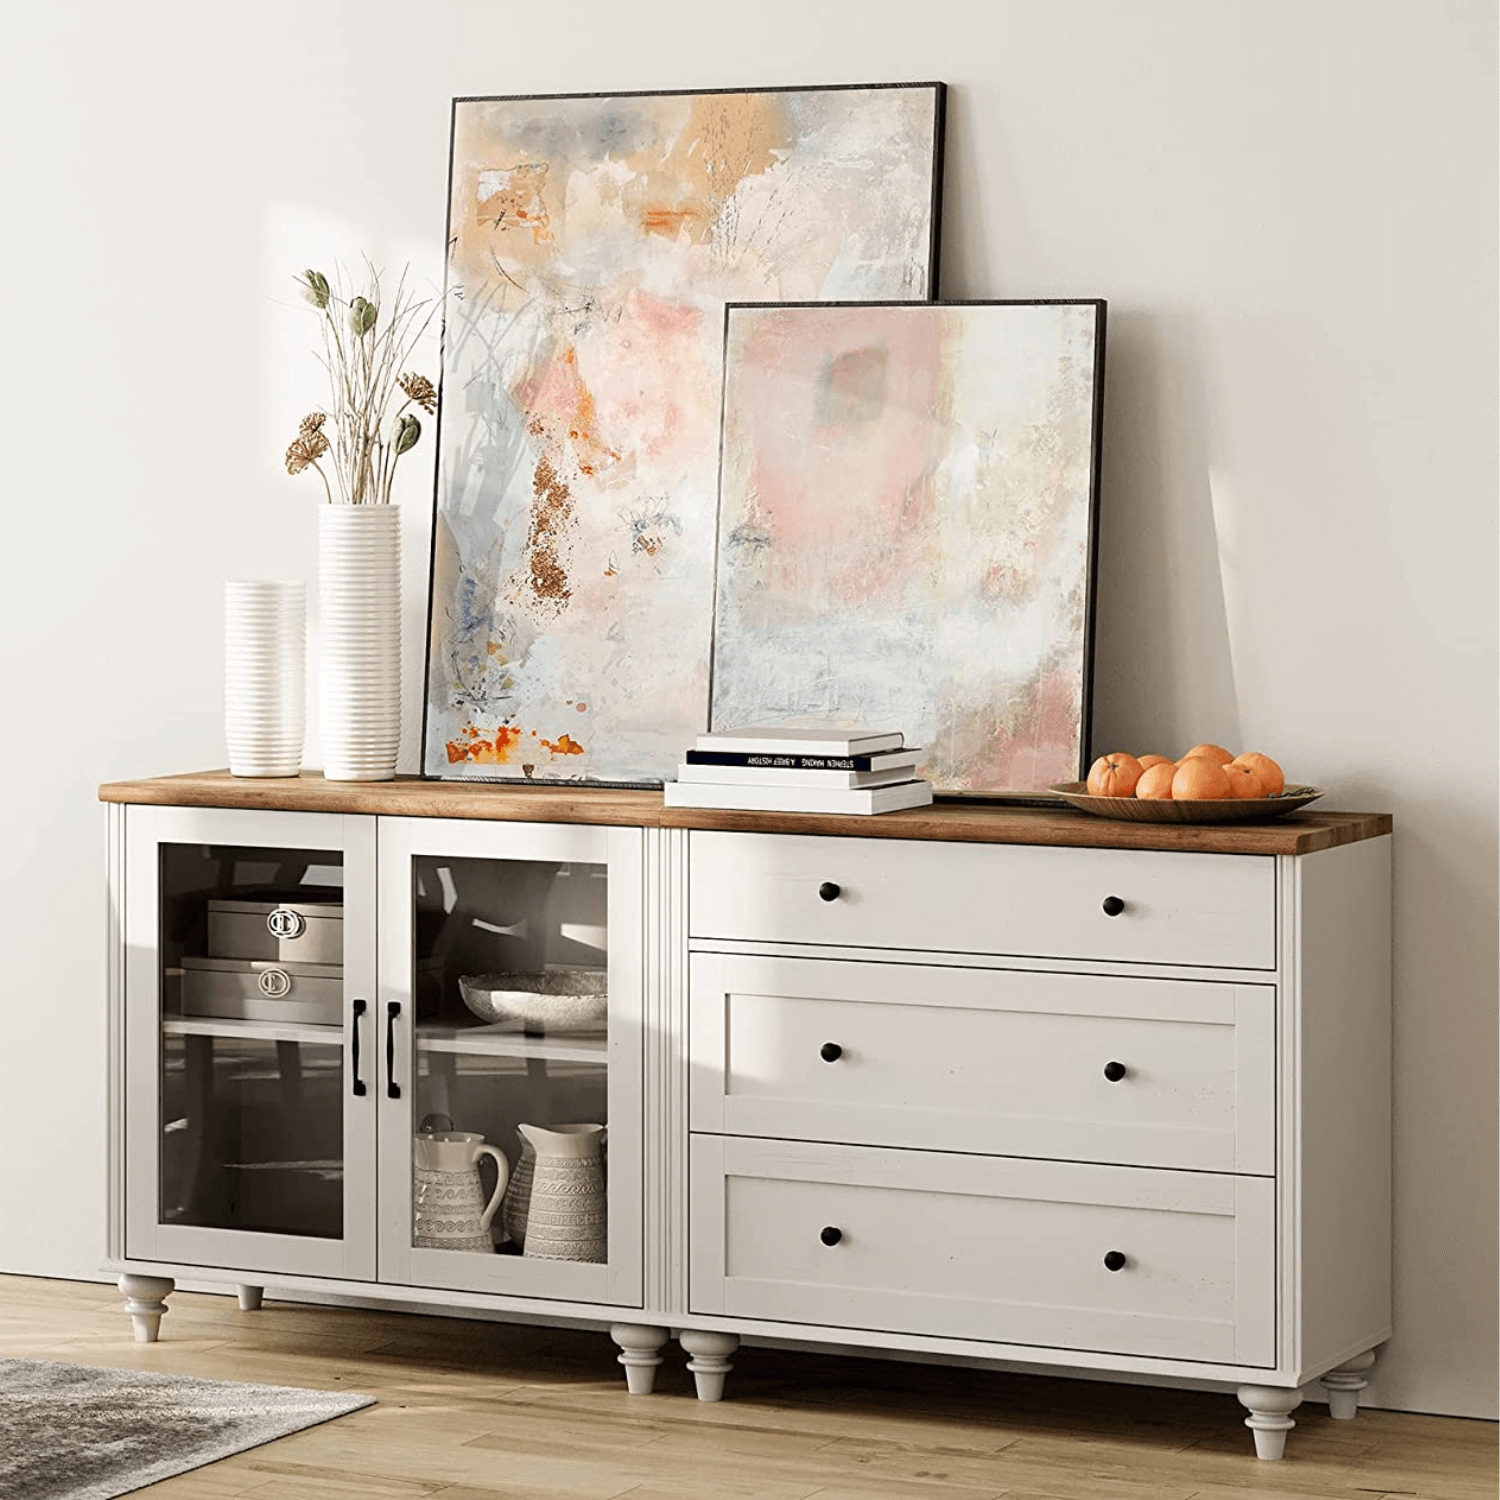 WAMPAT 68" LED Kitchen Buffet Cabinet with Storage Cabinet & 3 Drawers, Accent Sideboard Cupboard with Adjustable Shelf, White